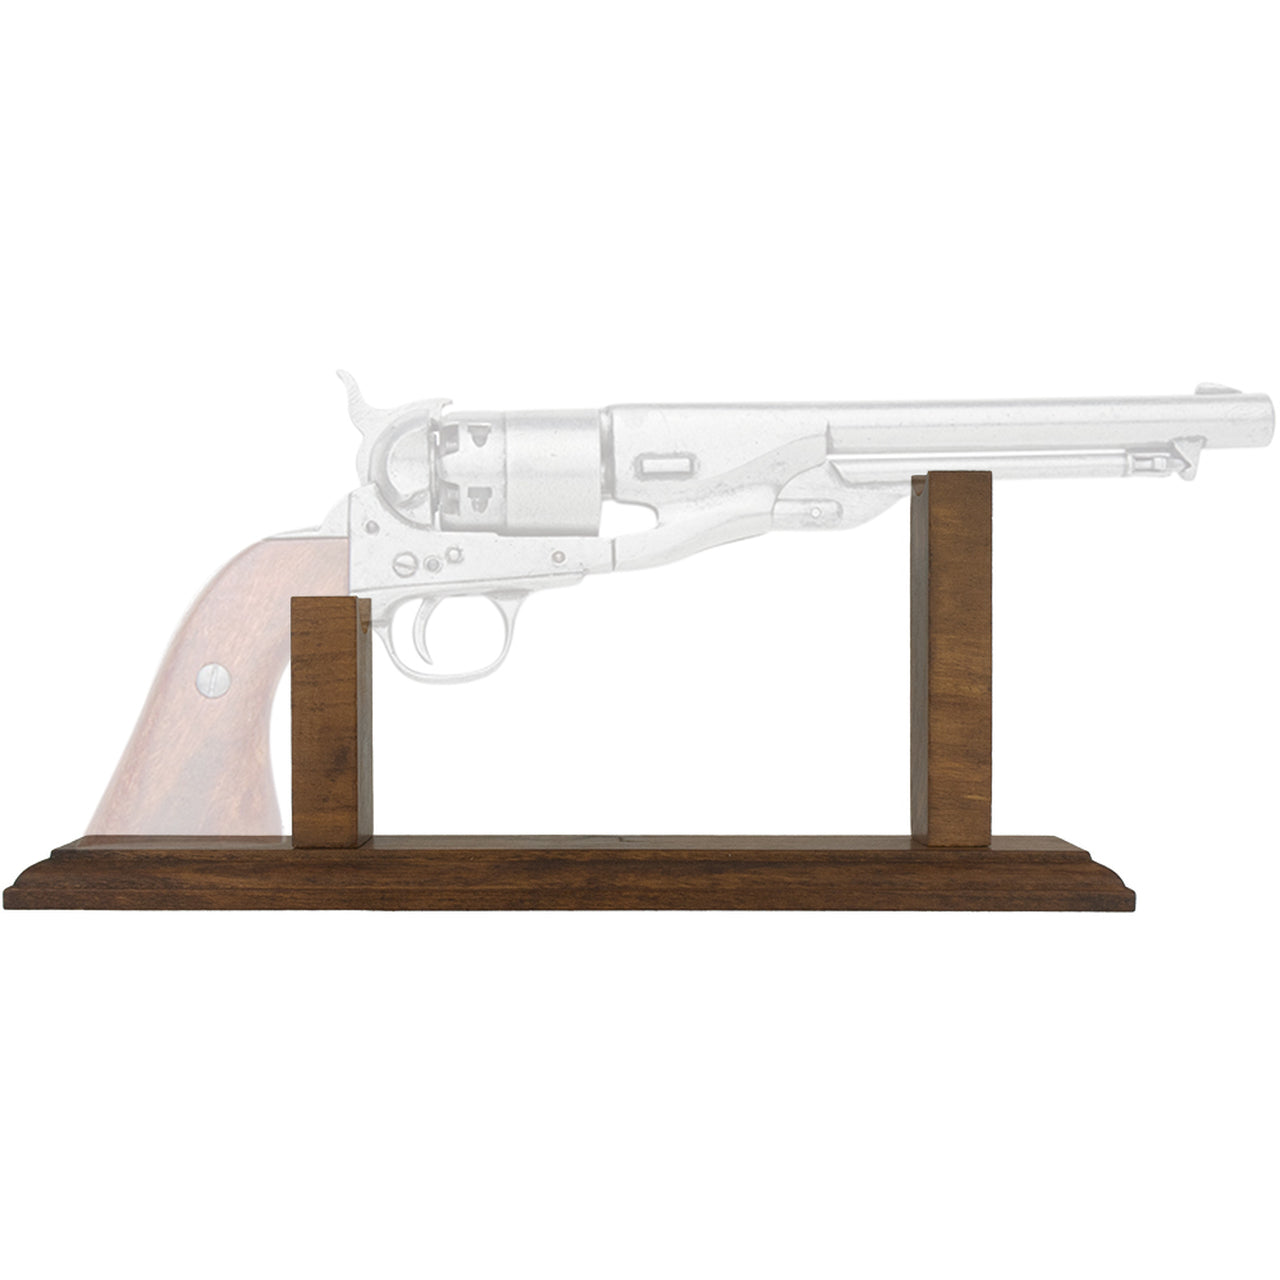 Large Display Stand For Pistols and Revolvers